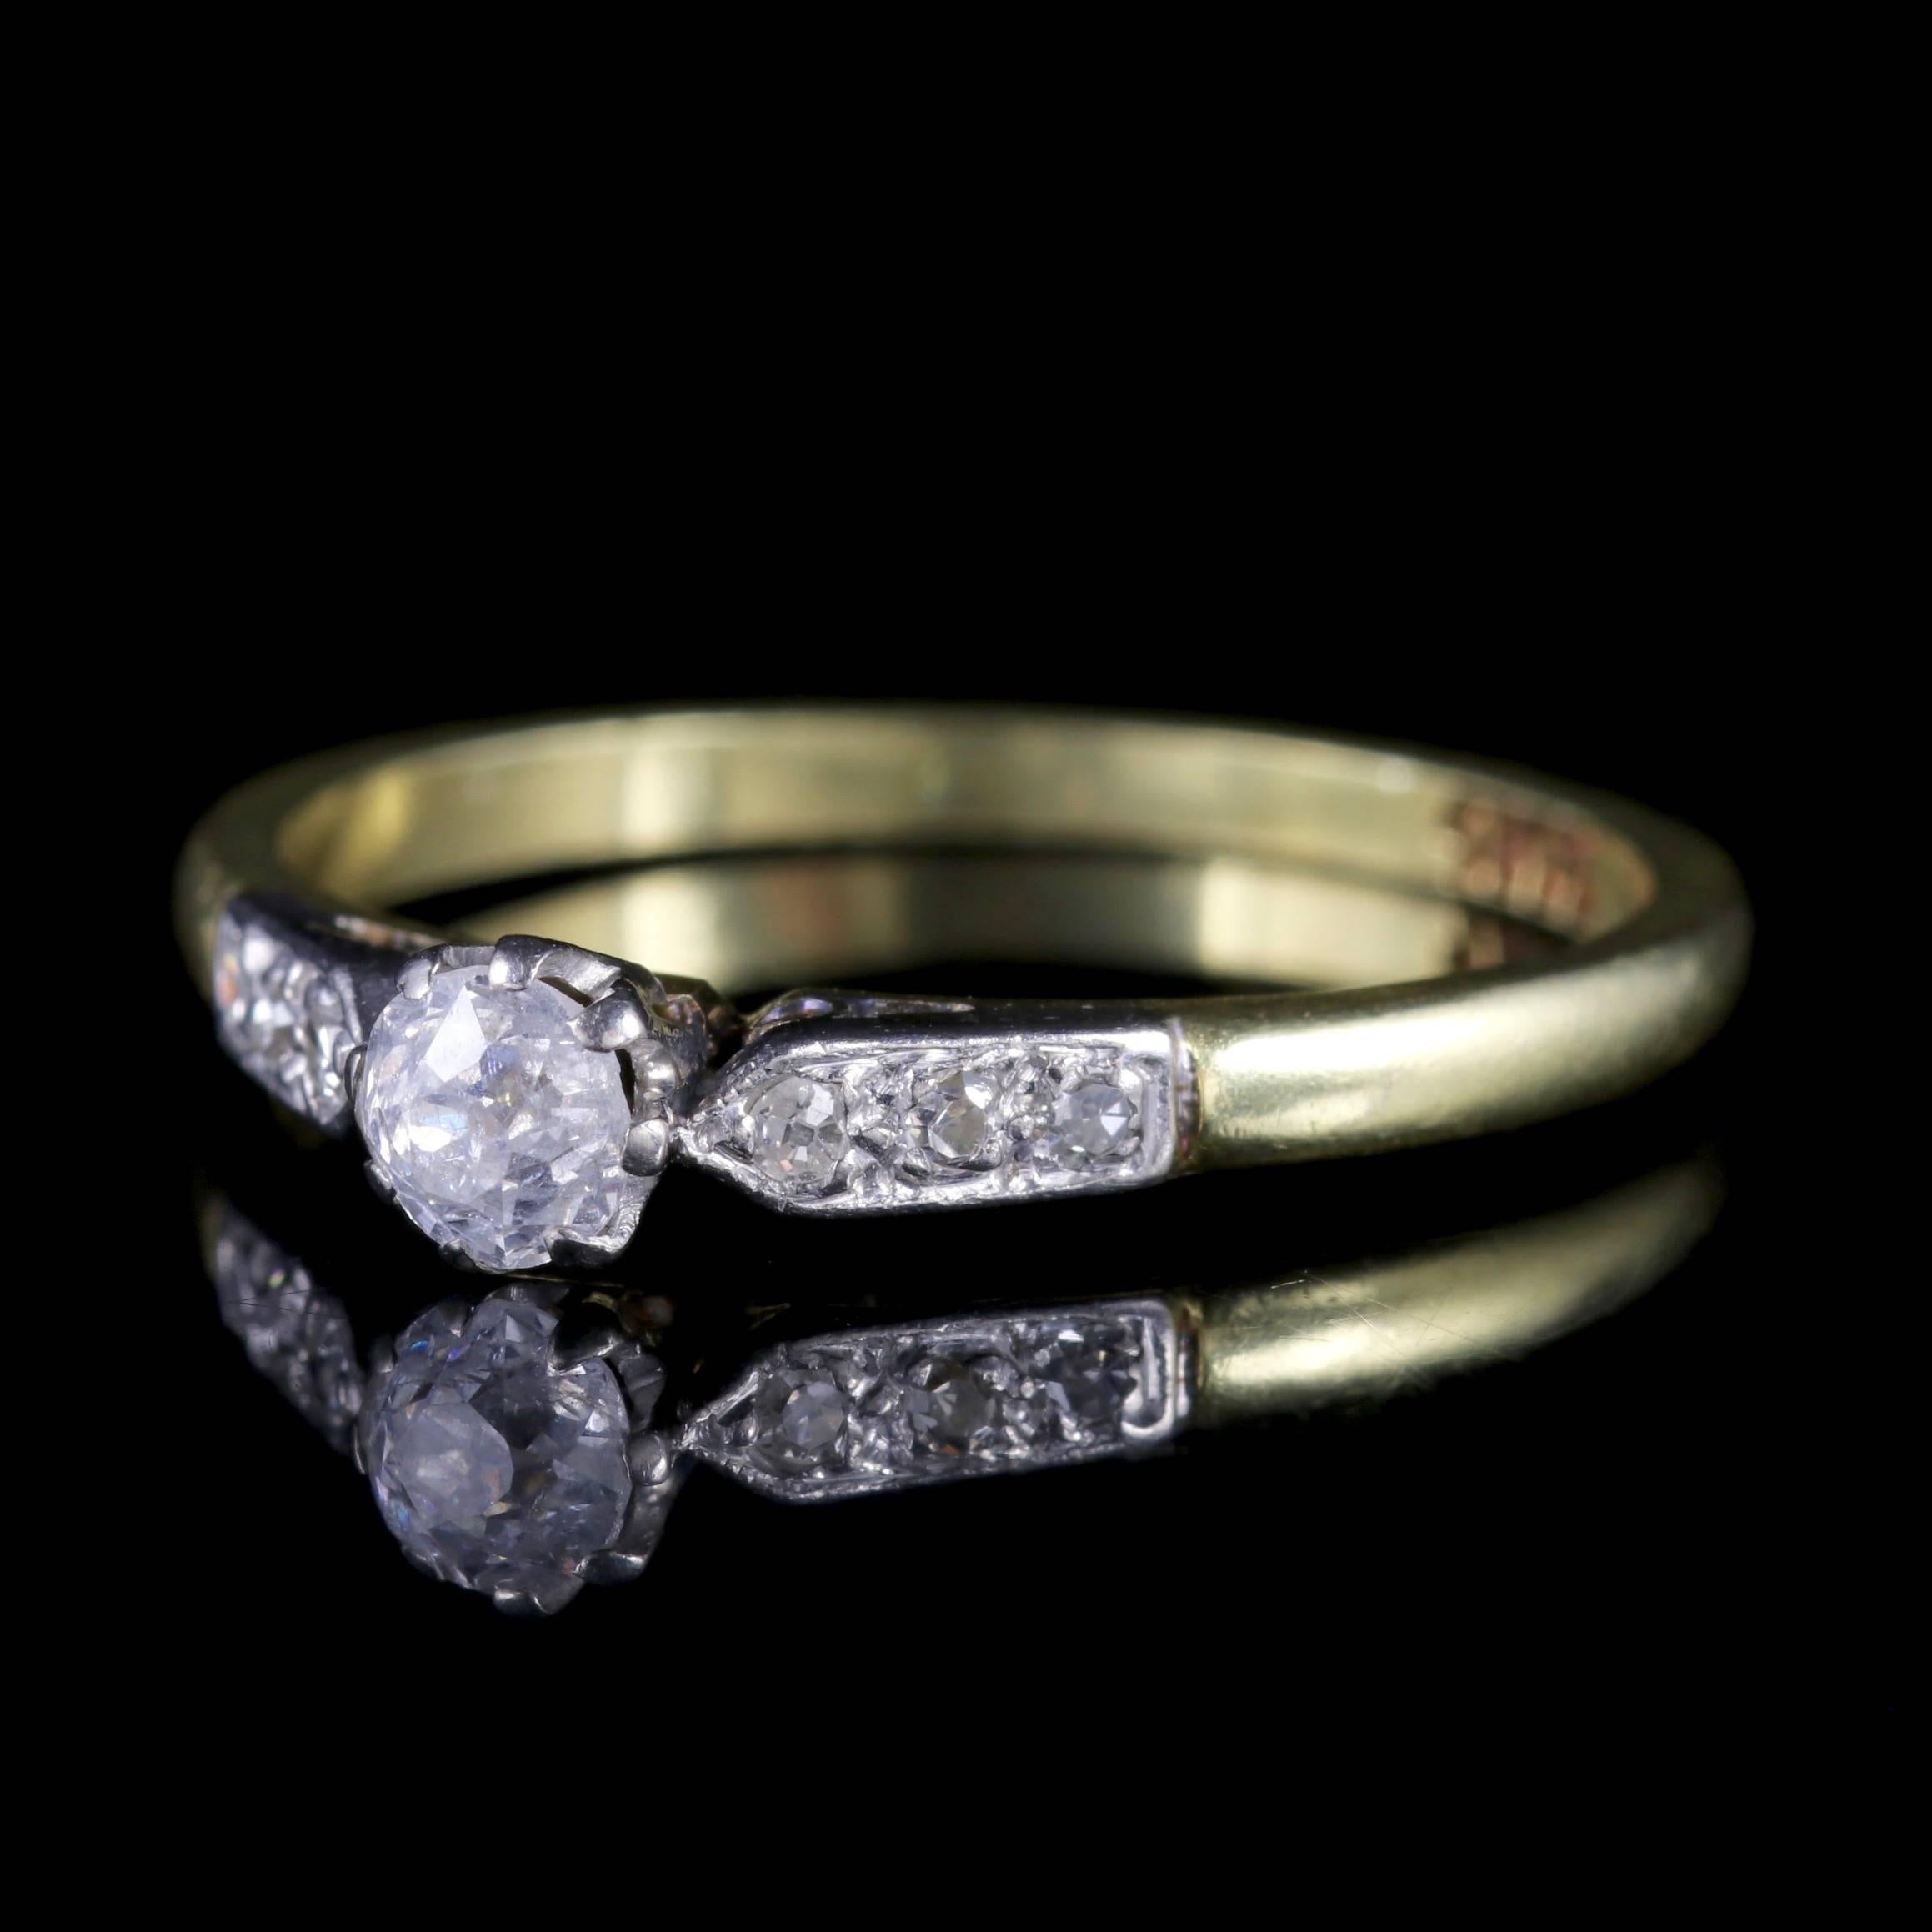 This genuine 18ct Gold antique Diamond ring is Edwardian Circa 1915. 

Set with a 0.20ct Old Cut Diamond in the centre with smaller Diamonds chasing down each shoulder. 

Diamond is the hardest mineral on Earth and this combined with its exceptional